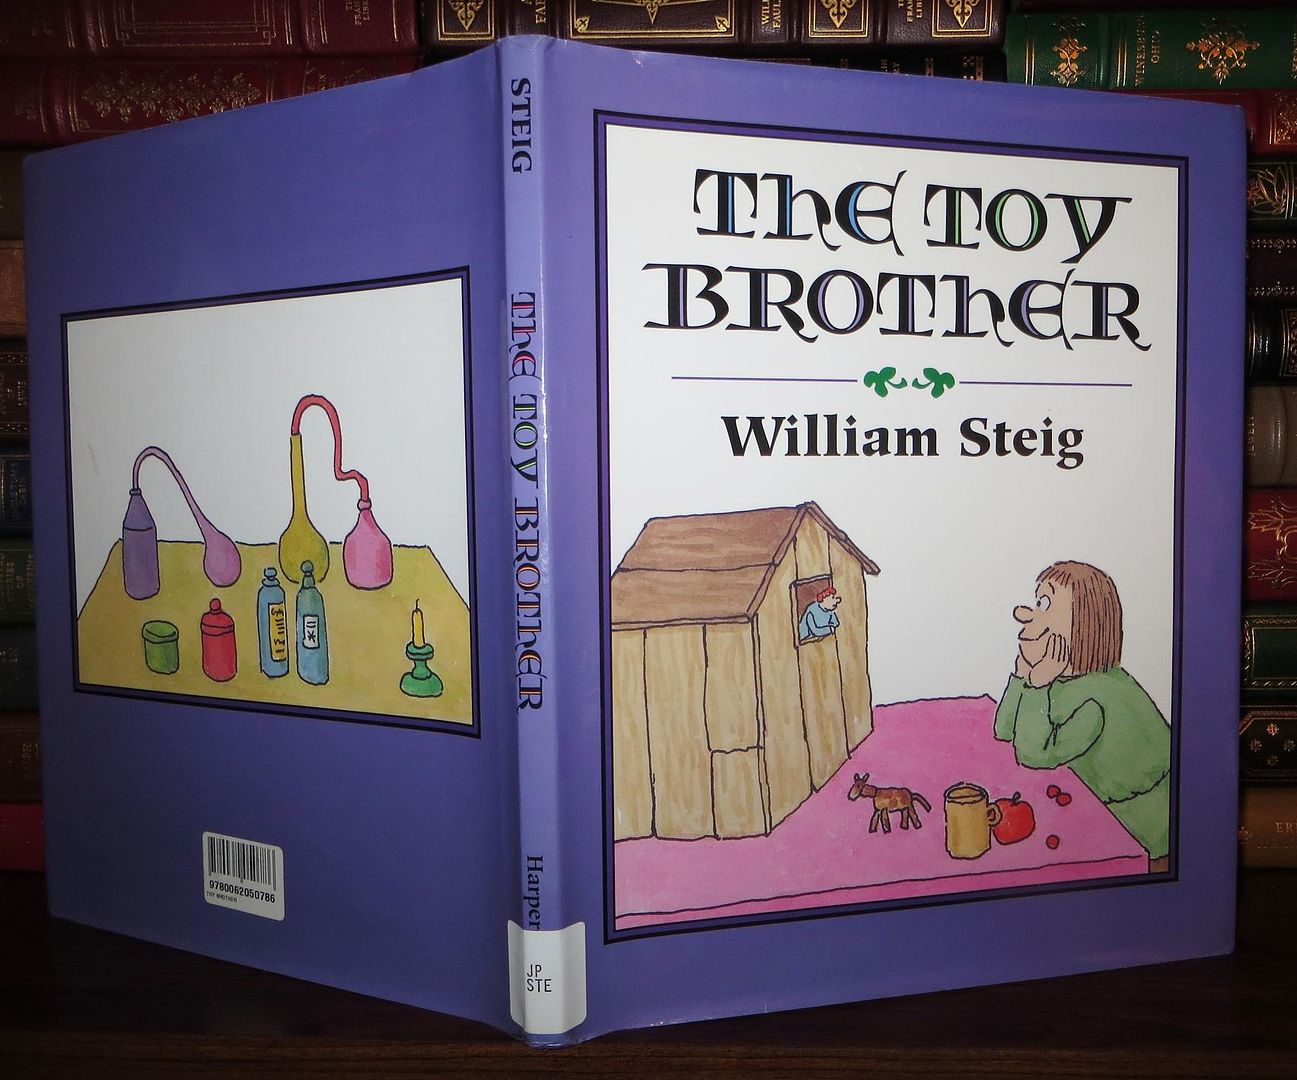 STEIG, WILLIAM - The Toy Brother